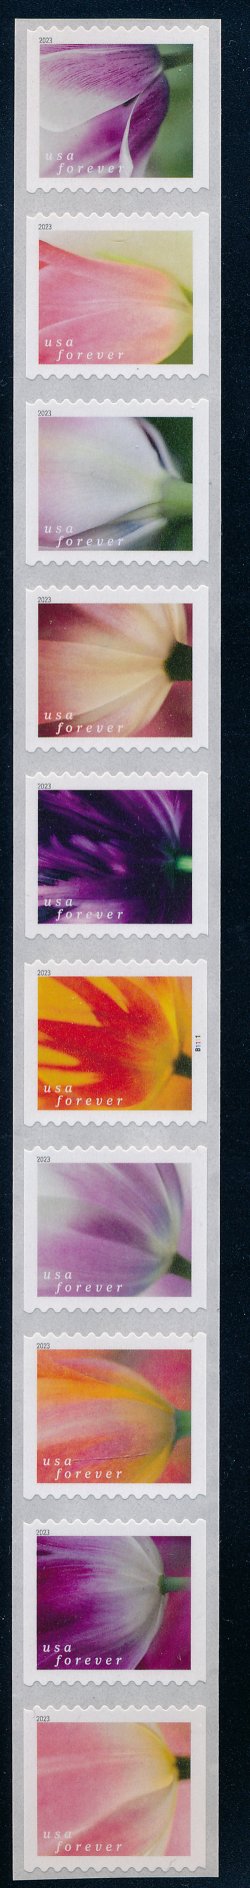 5767-76 Forever Tulip Blossom Mnh PNC of 10 5767-76pnc